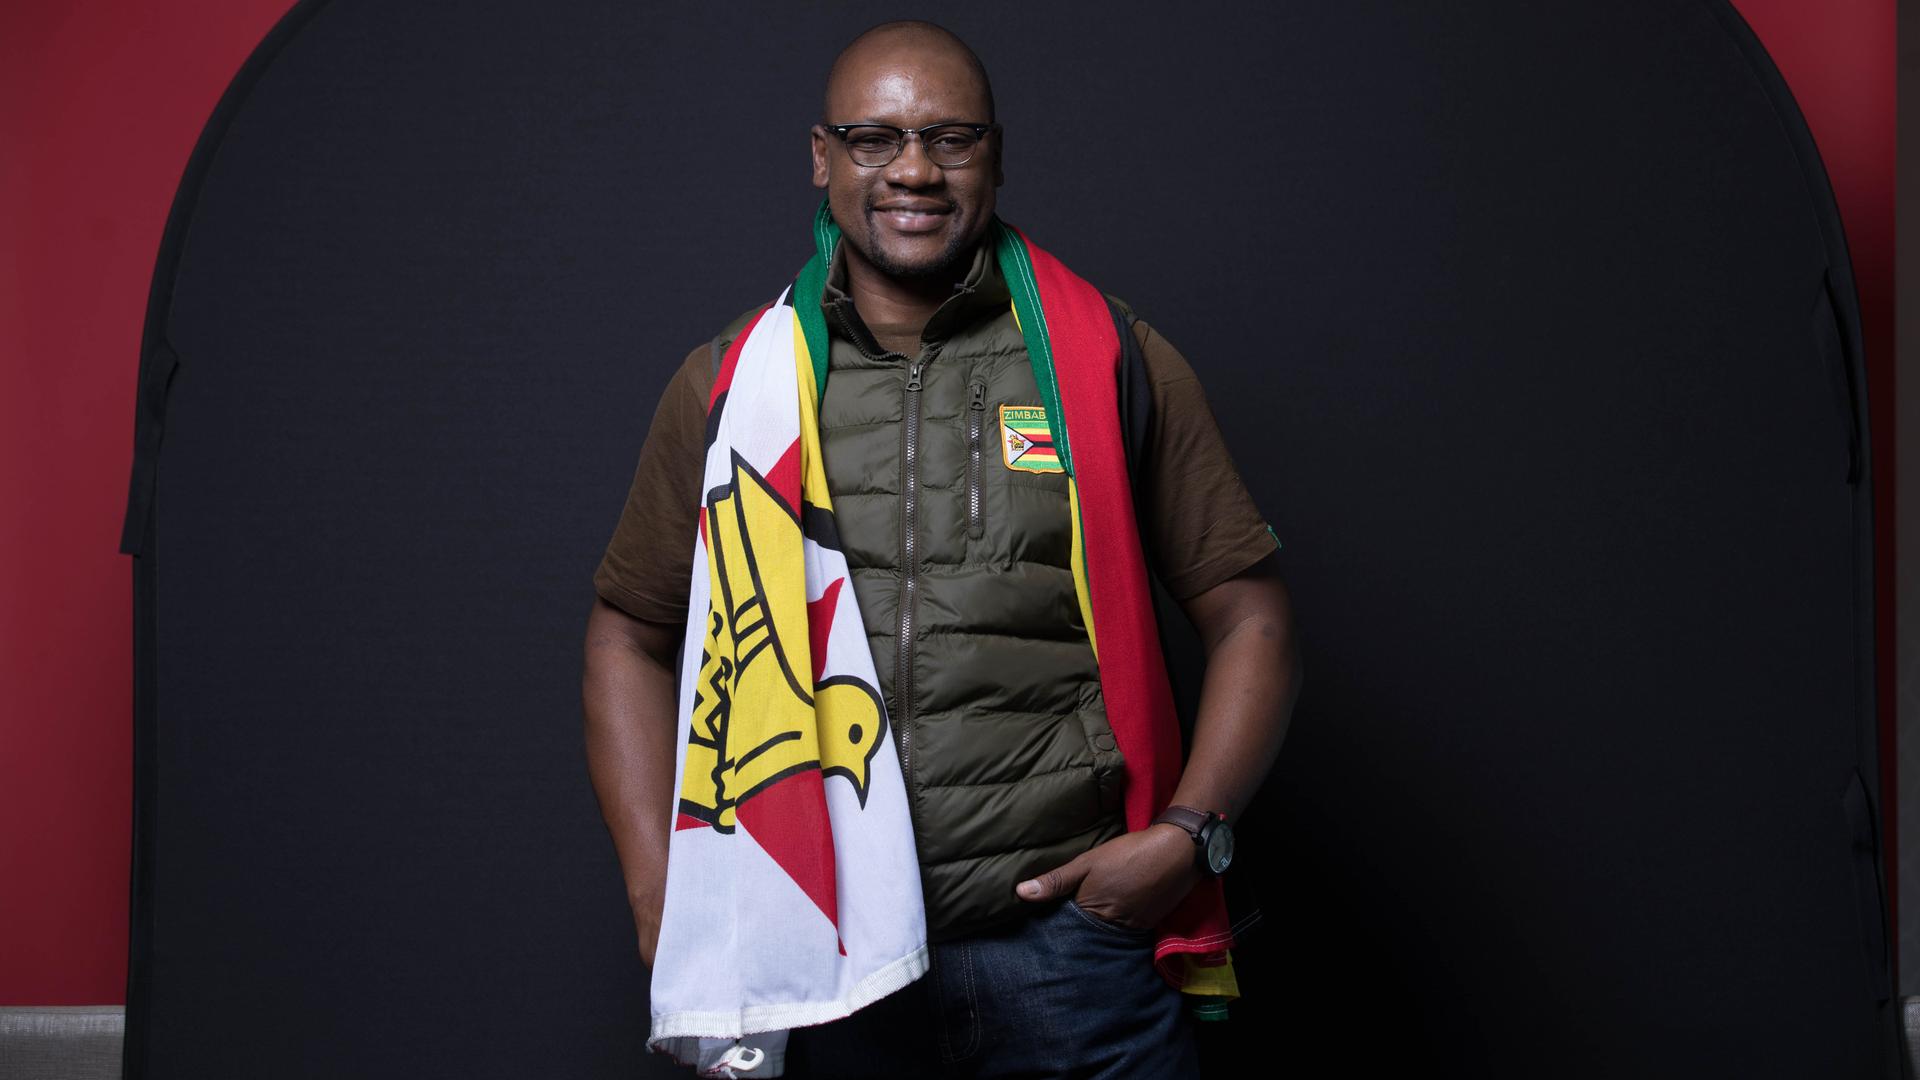 Before 2016, Evan Mawarire was a little-known pastor in Zimbabwe. Now he's entered politics. "People went so far as clamoring for me to run for president," he said. "That is not a call to be taken lightly." 